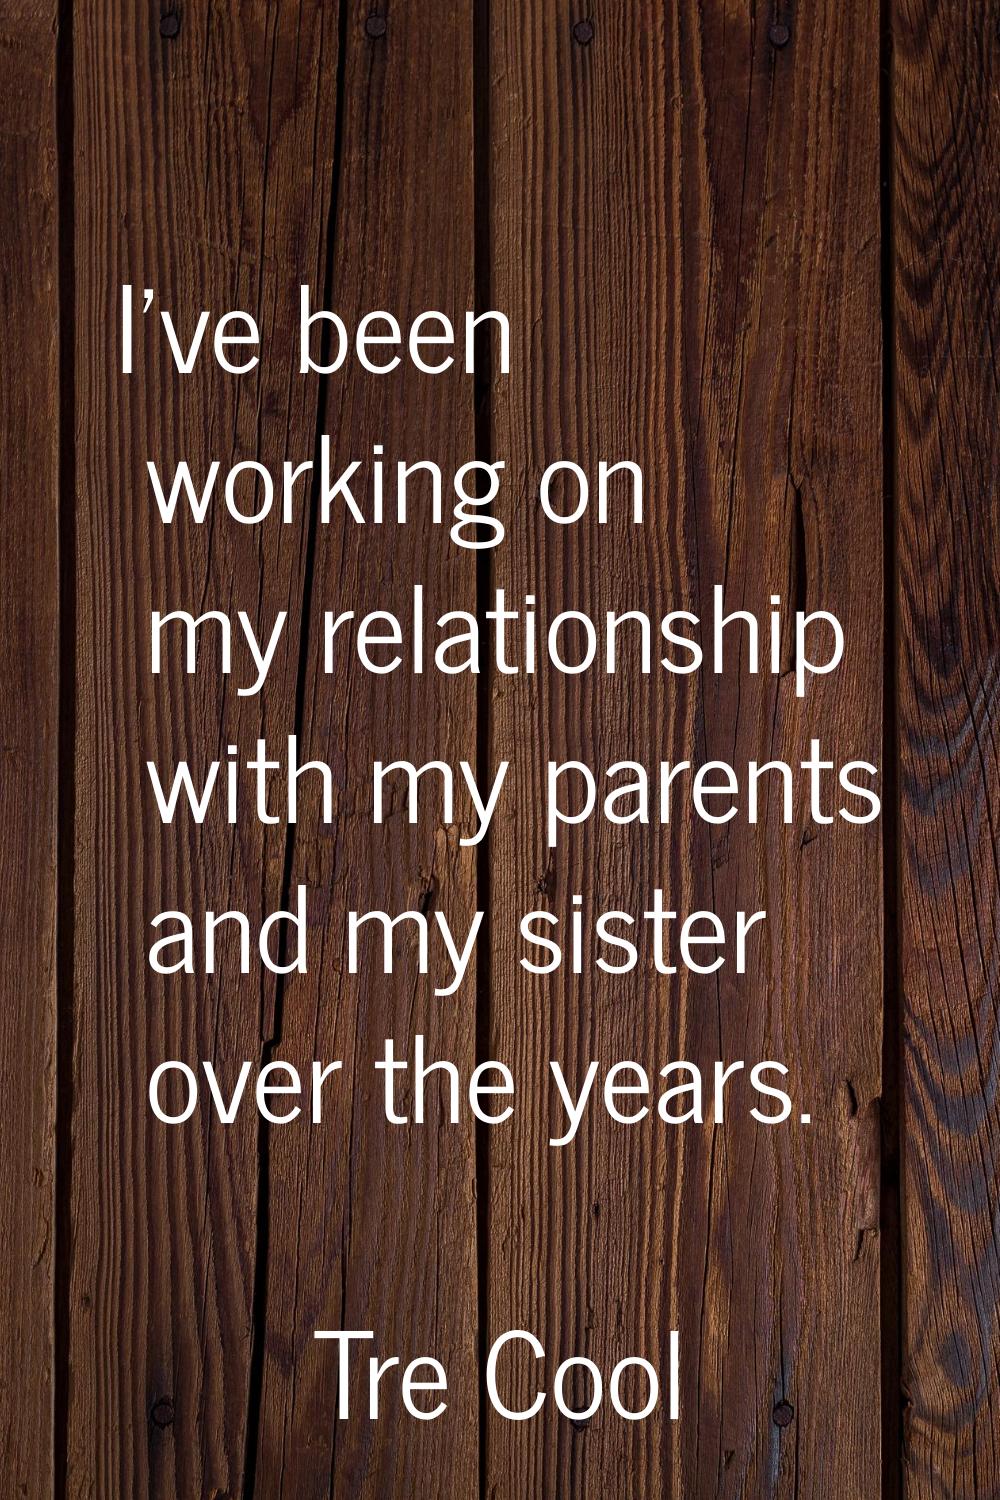 I've been working on my relationship with my parents and my sister over the years.